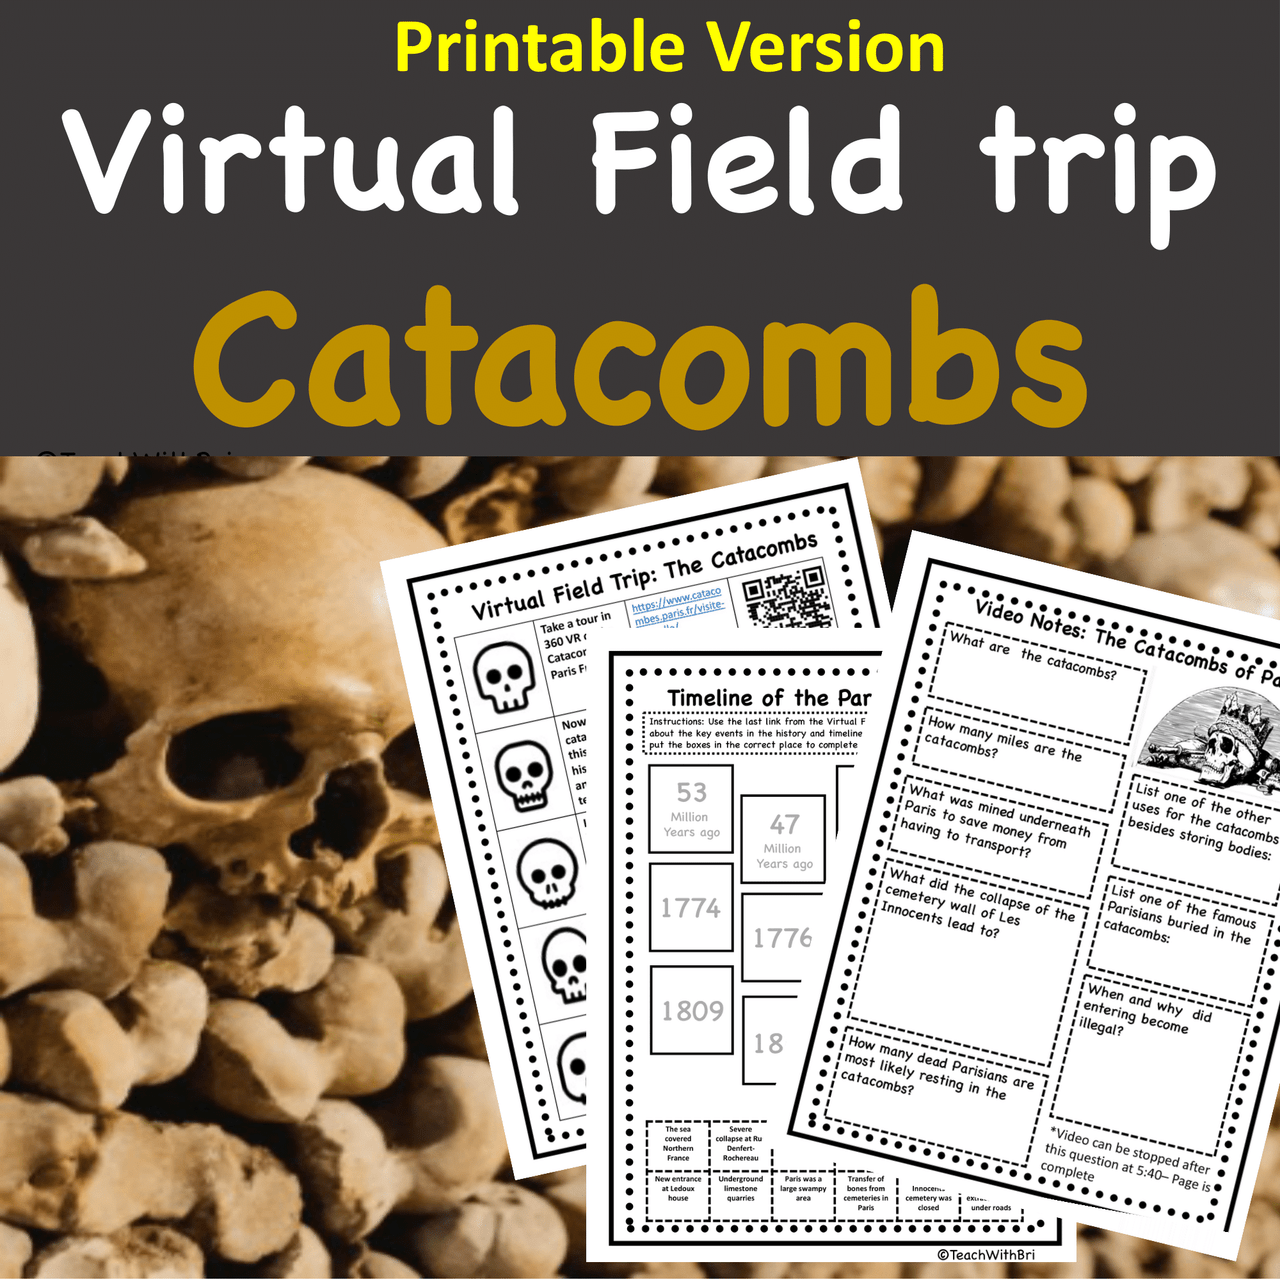 Catacombs Virtual Field Trip for Middle and High School